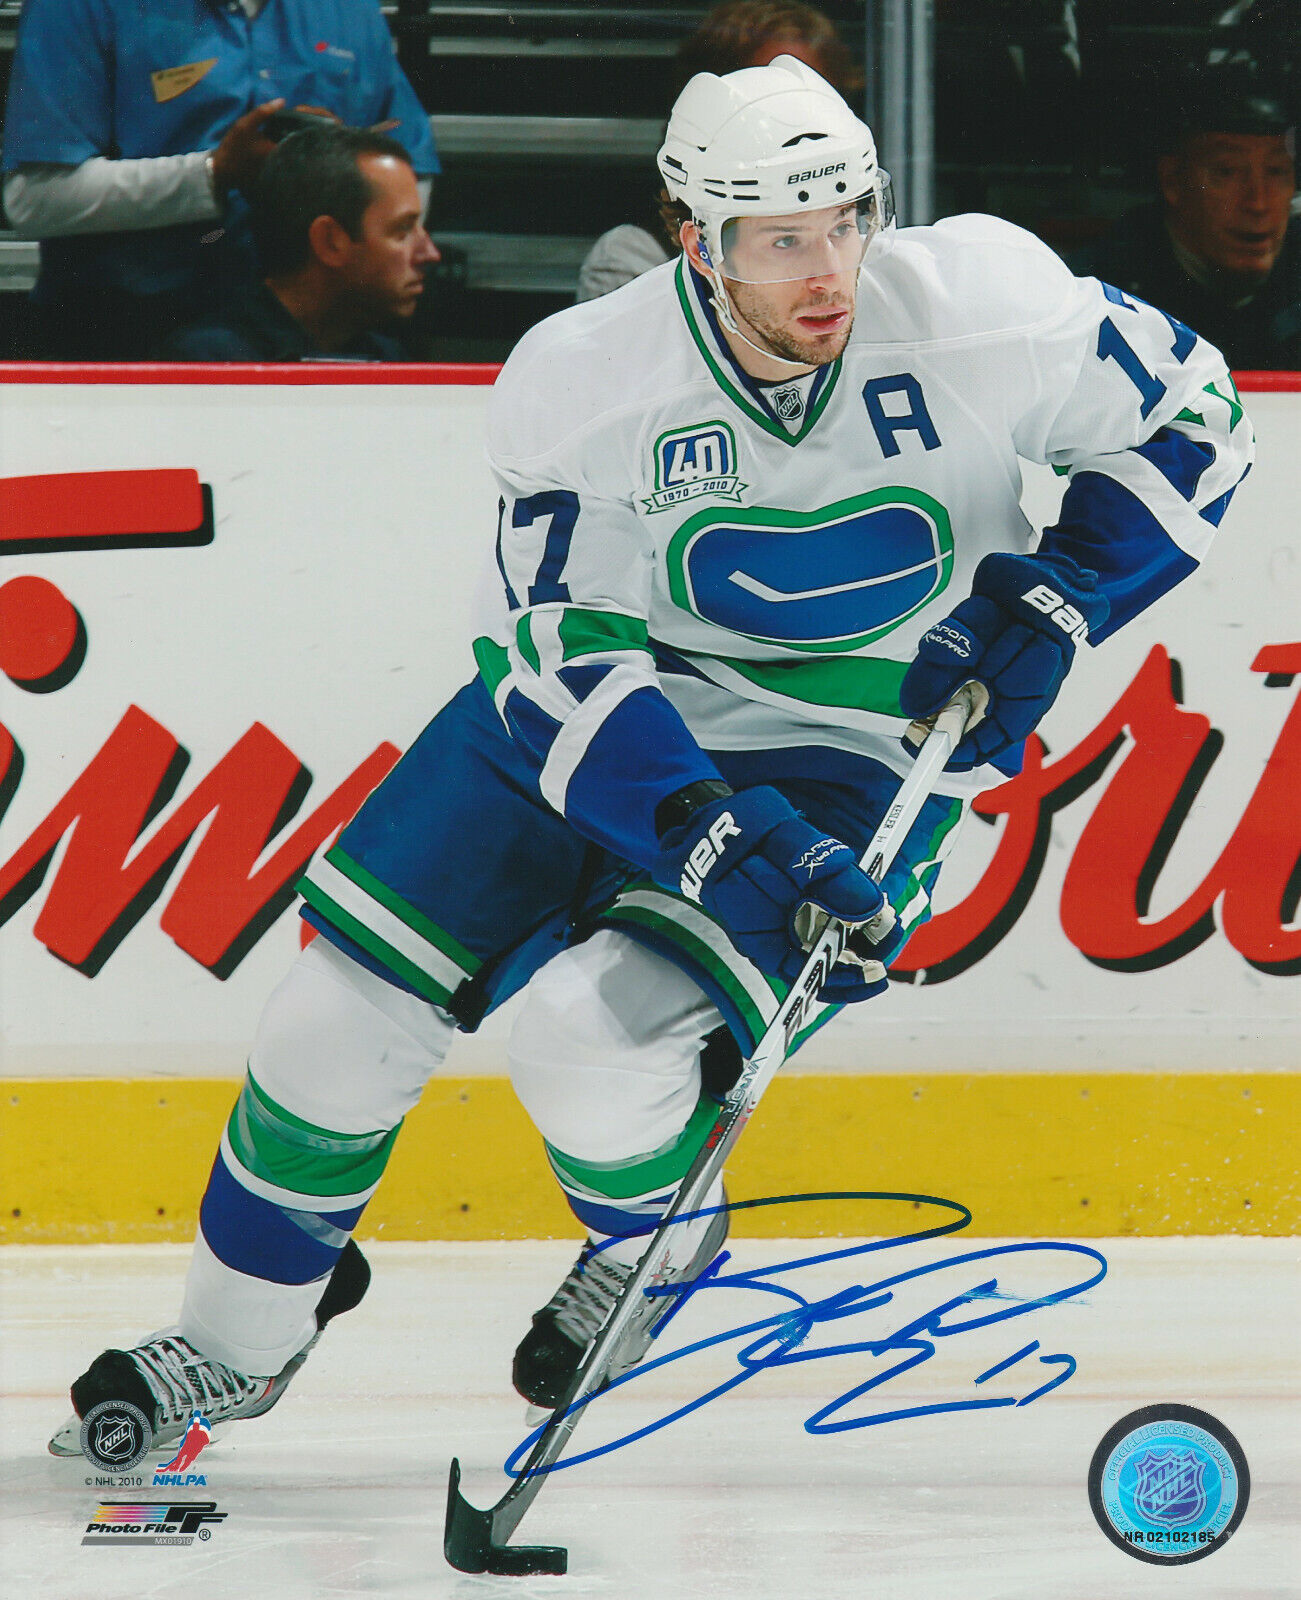 RYAN KESLER SIGNED VANCOUVER CANUCKS 8x10 Photo Poster painting #4 Autograph